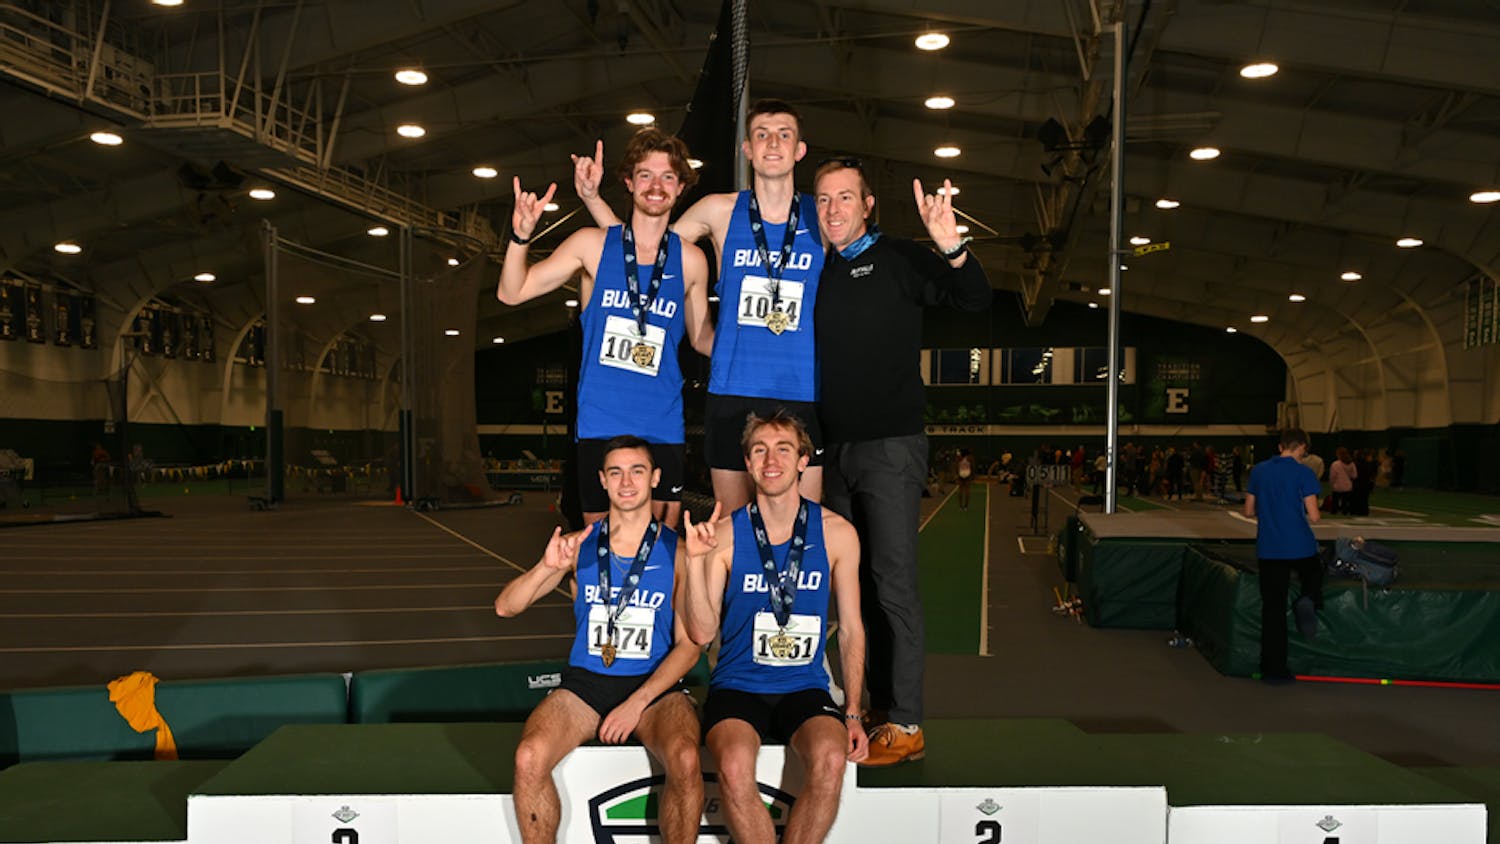 UB claimed first in the men’s 4000m DMR, narrowly edging out Kent State by two seconds with a time of 9:56.10.&nbsp;